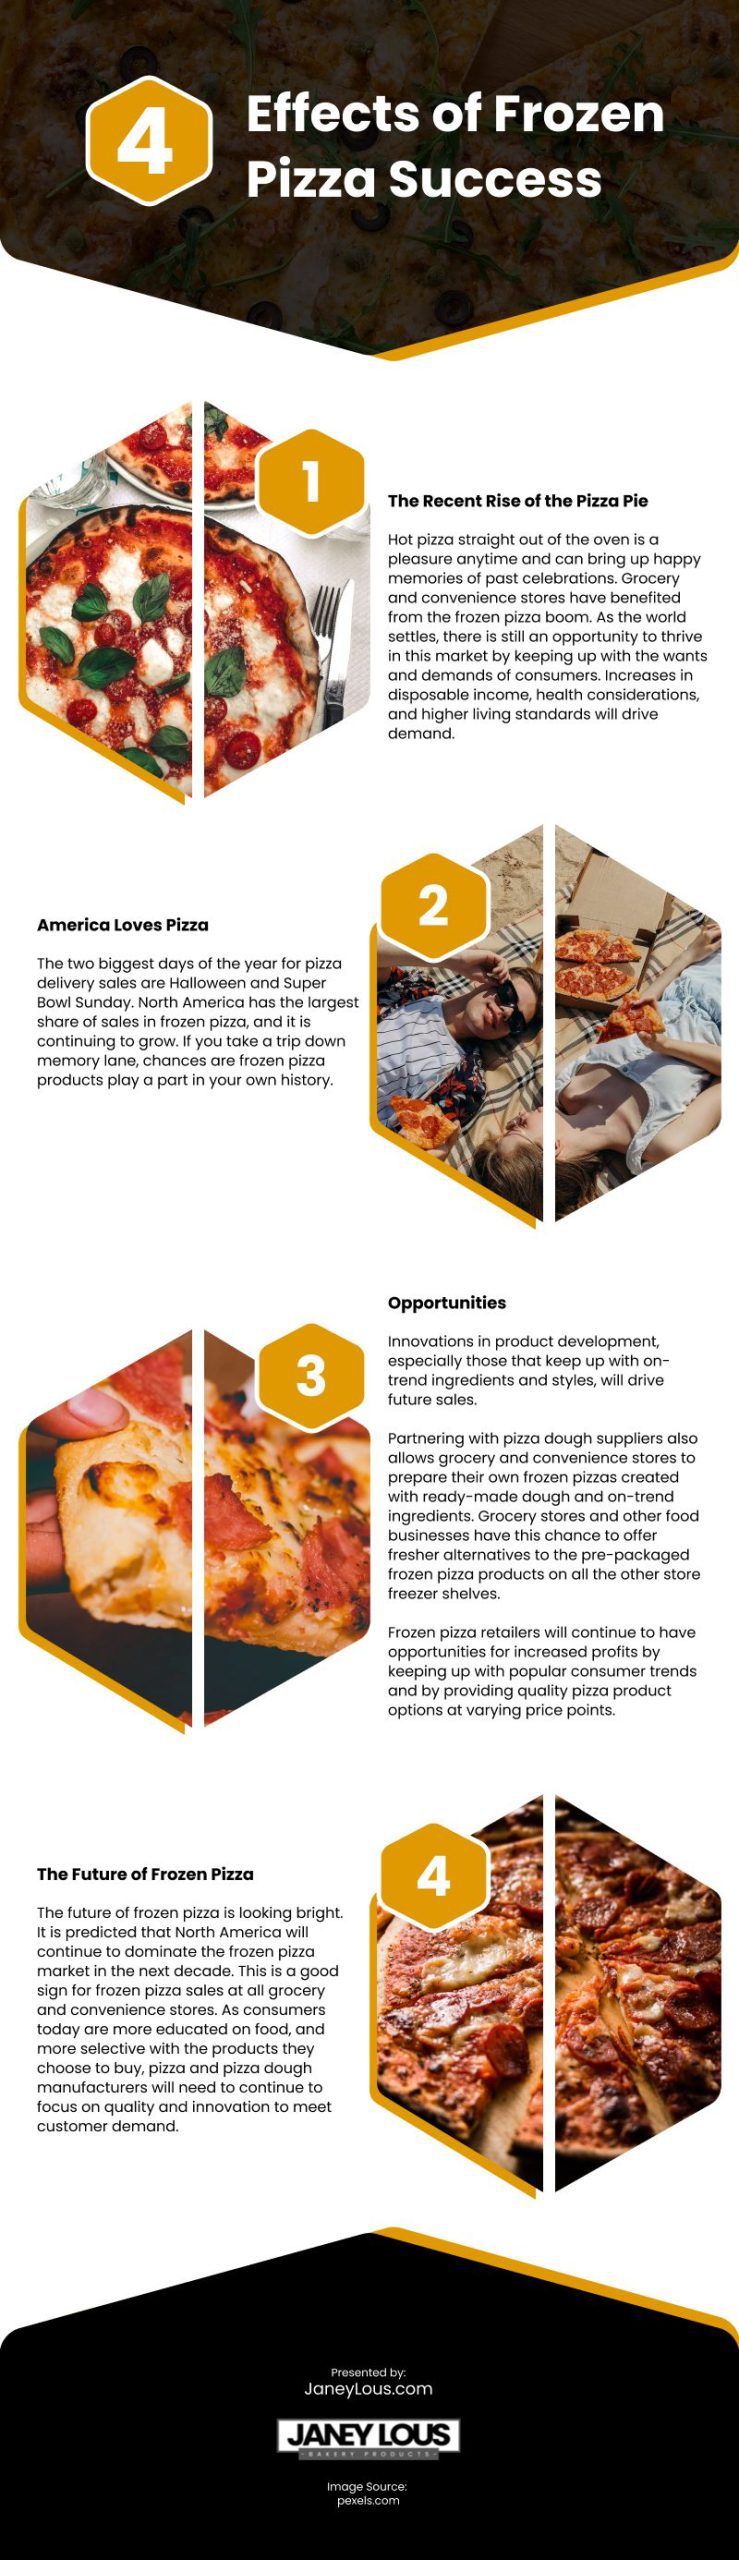 4 Effects of Frozen Pizza Success Infographic